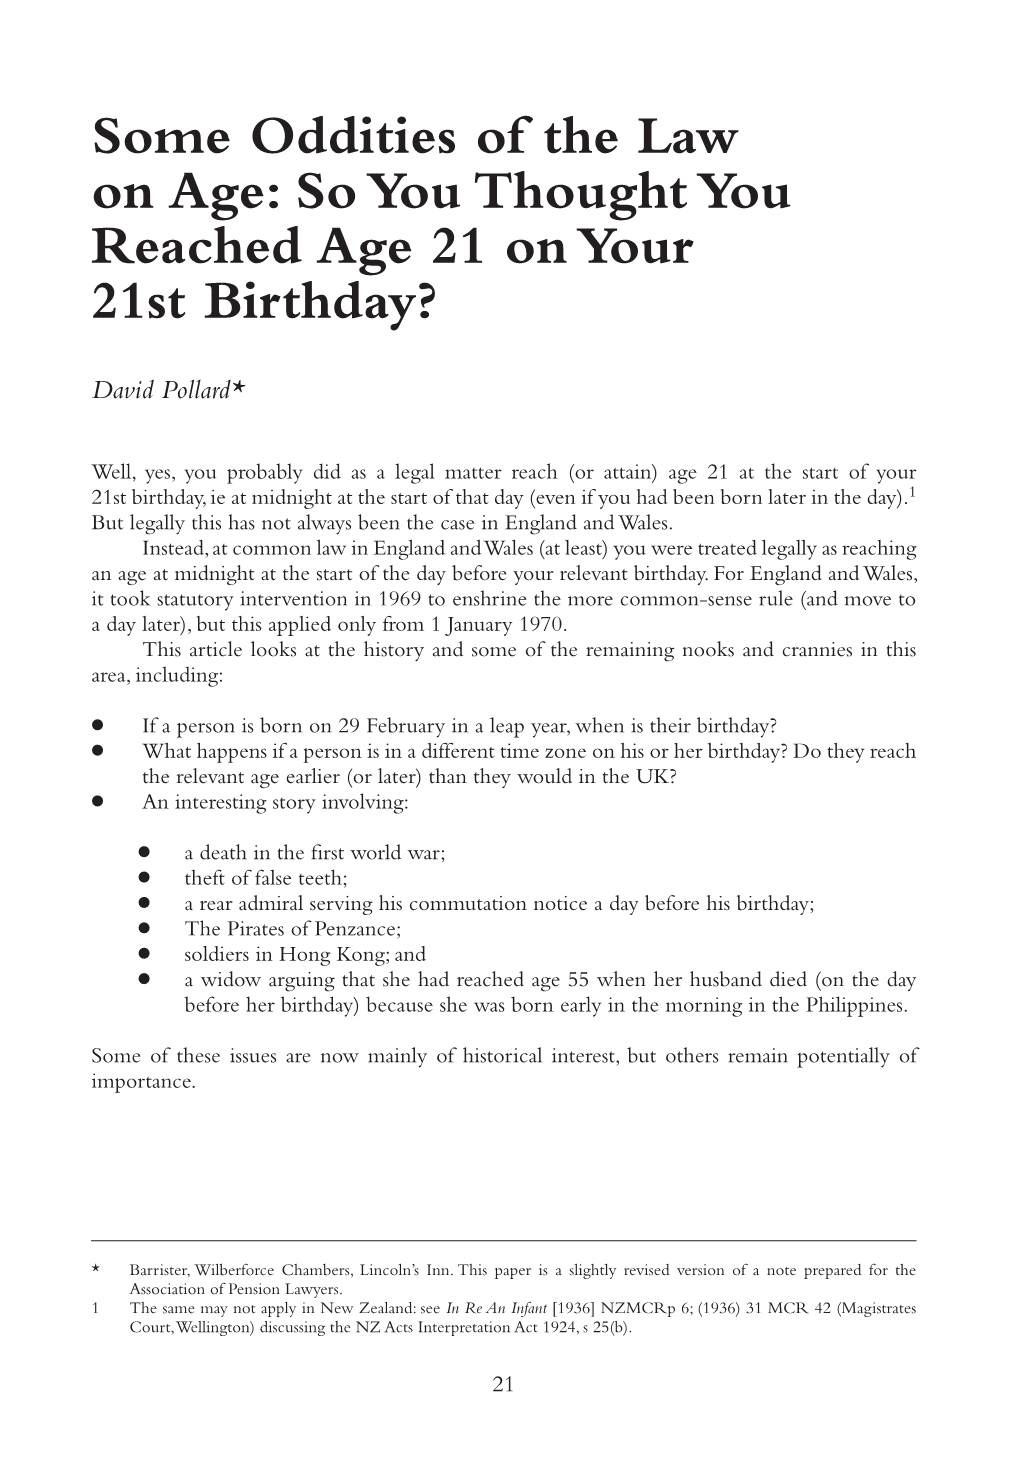 Some Oddities of the Law on Age: So You Thought You Reached Age 21 on Your 21St Birthday?